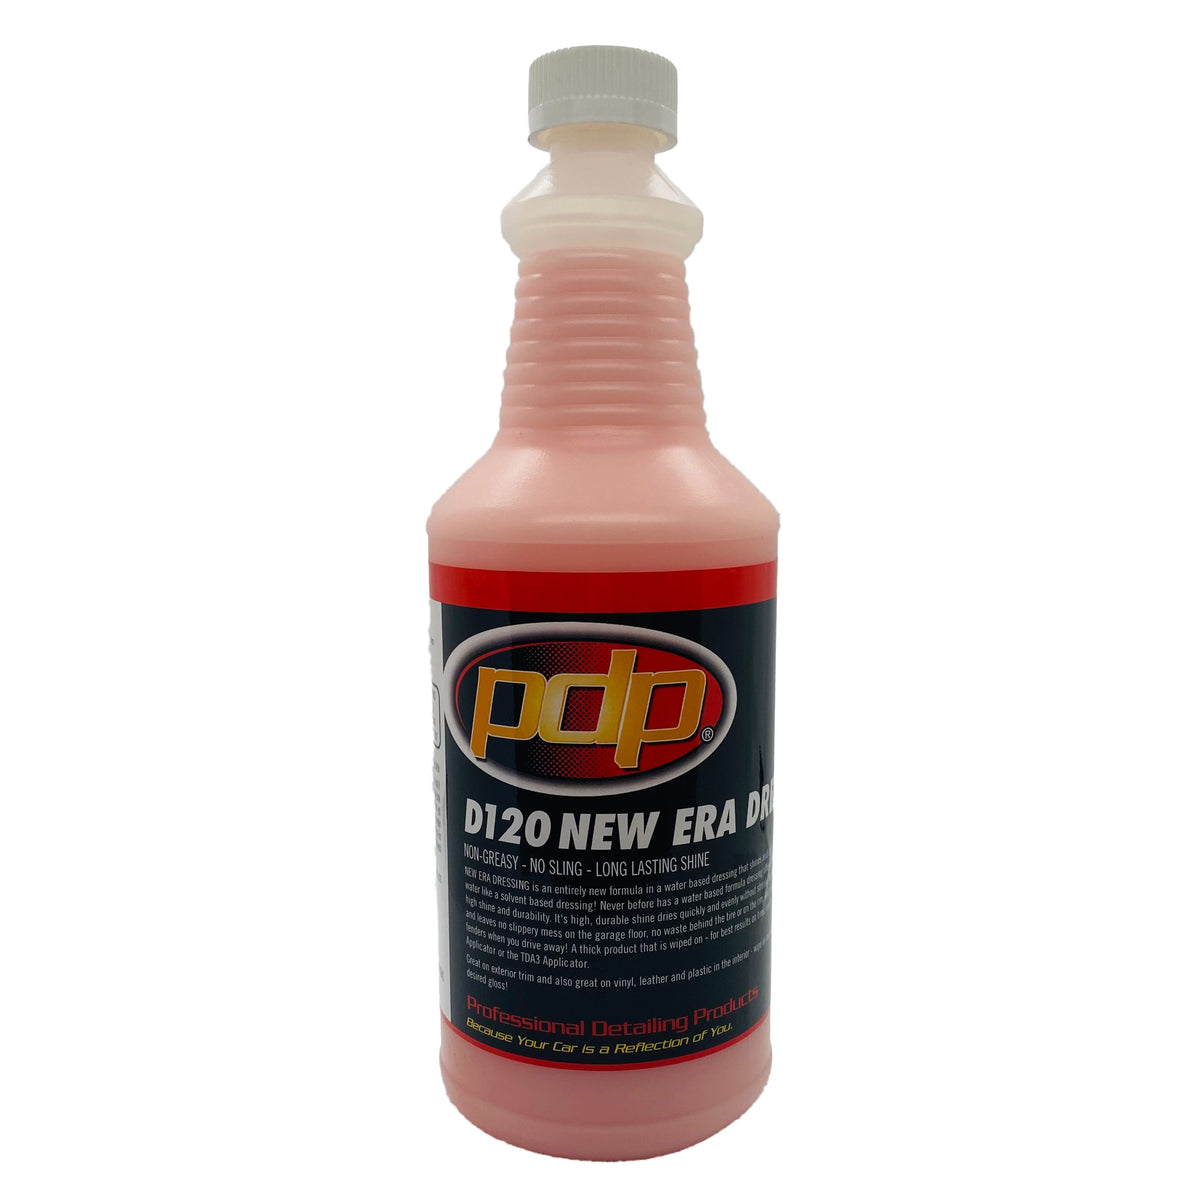 TIRE DRESSING APPLICATOR. Professional Detailing Products, Because Your Car  is a Reflection of You